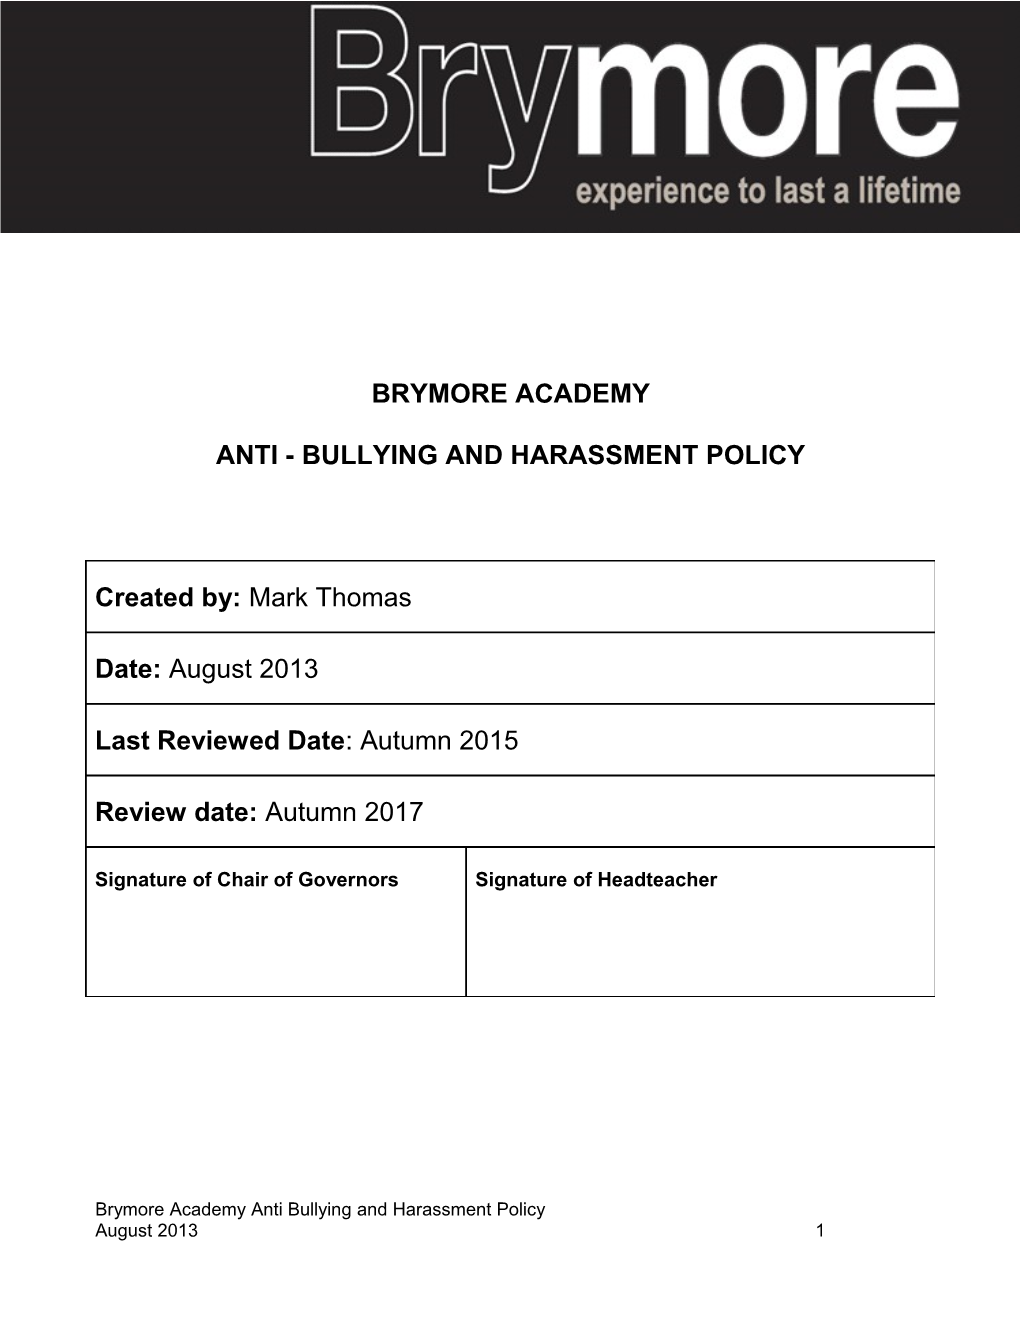 Anti - Bullying and Harassment Policy